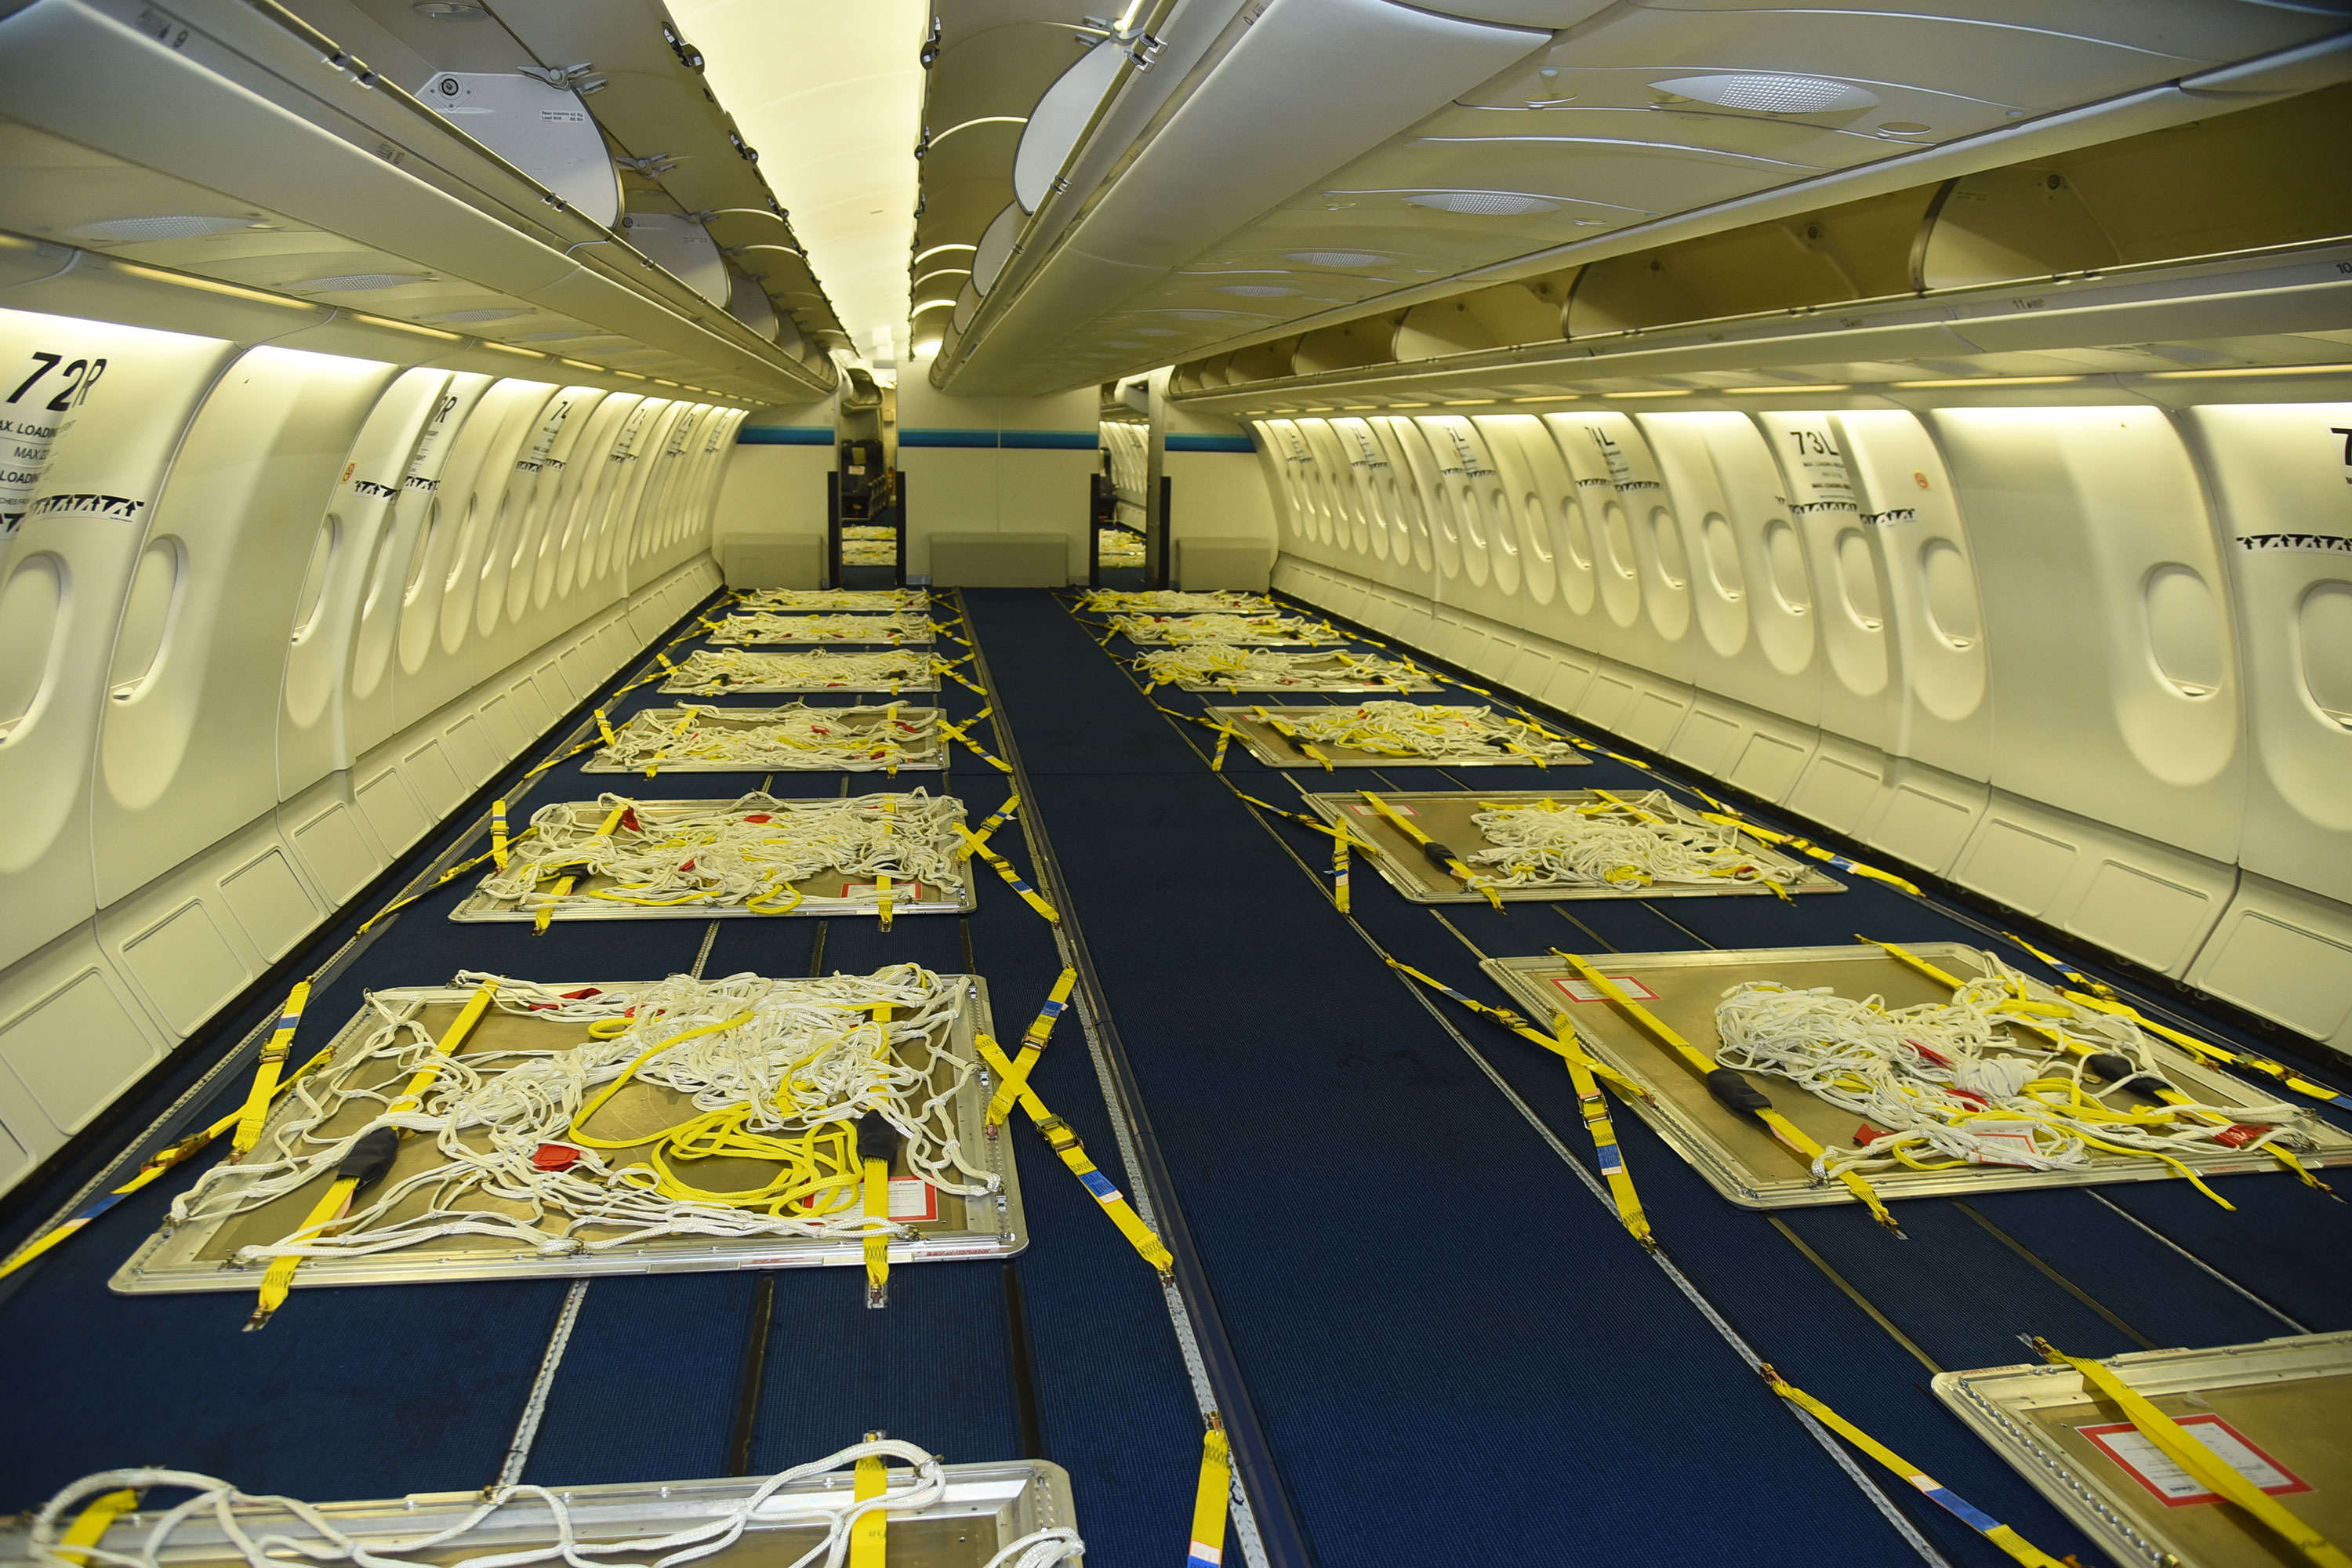 A look of the upper deck of the SriLankan Cargo A330-200 freighter aircraft which is equipped to carry 60 cubic metres of freight